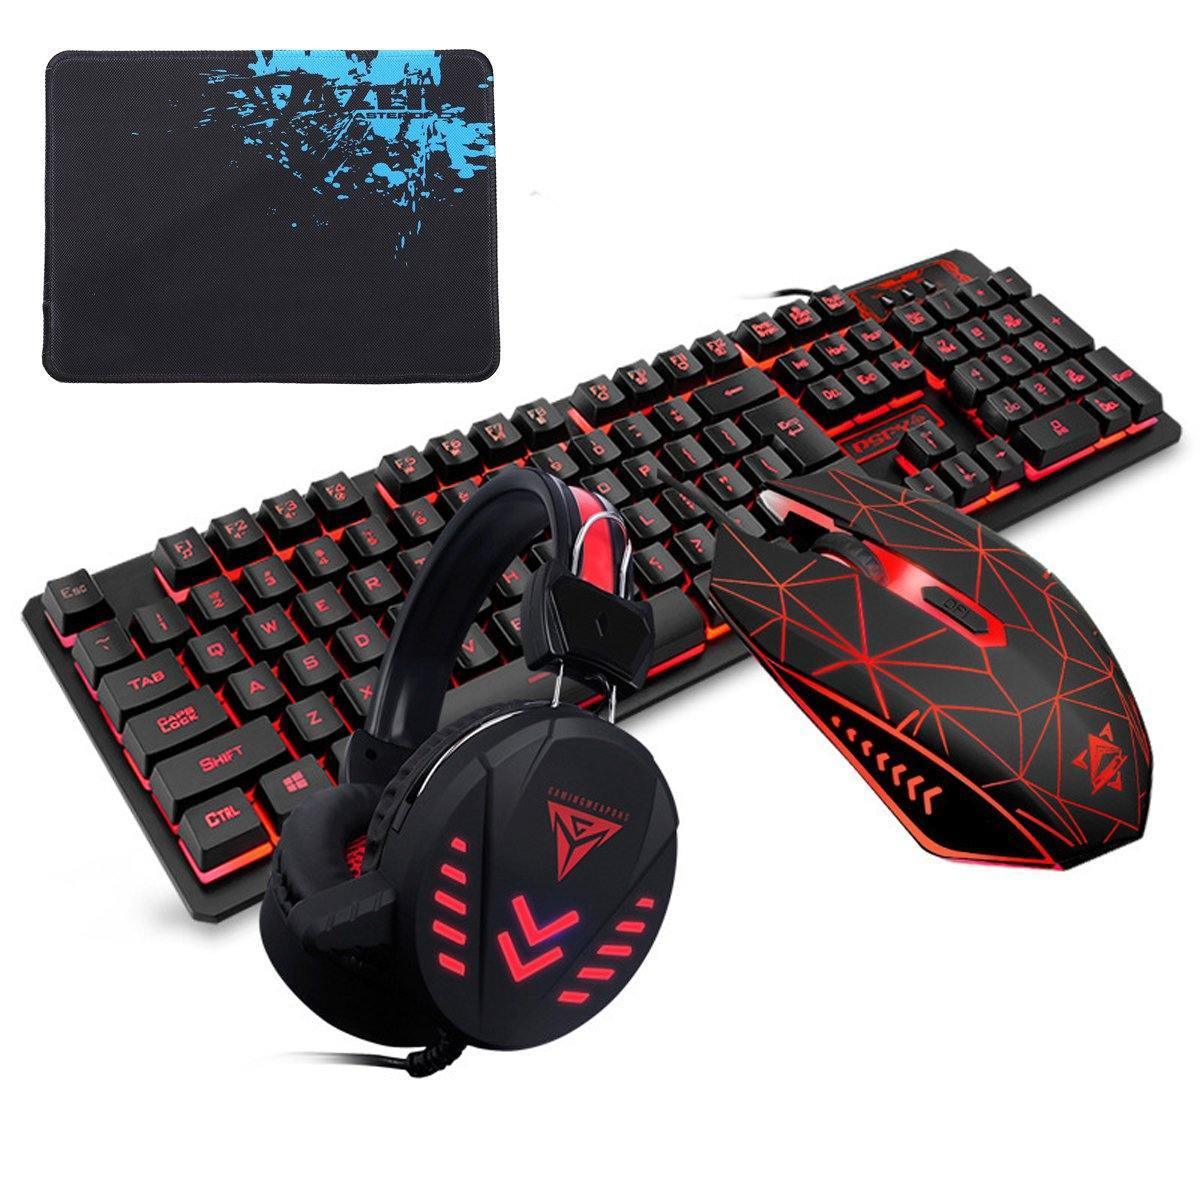 ezy2find Gaming Mouse Sets with Mouse Pad Black 104Key Waterproof design USB Wired Multimedia RGB Backlit Mechanical Gaming Keyboard and LED Gaming Headphone and 3200DPI LED Gaming Mouse Sets with Mouse Pad